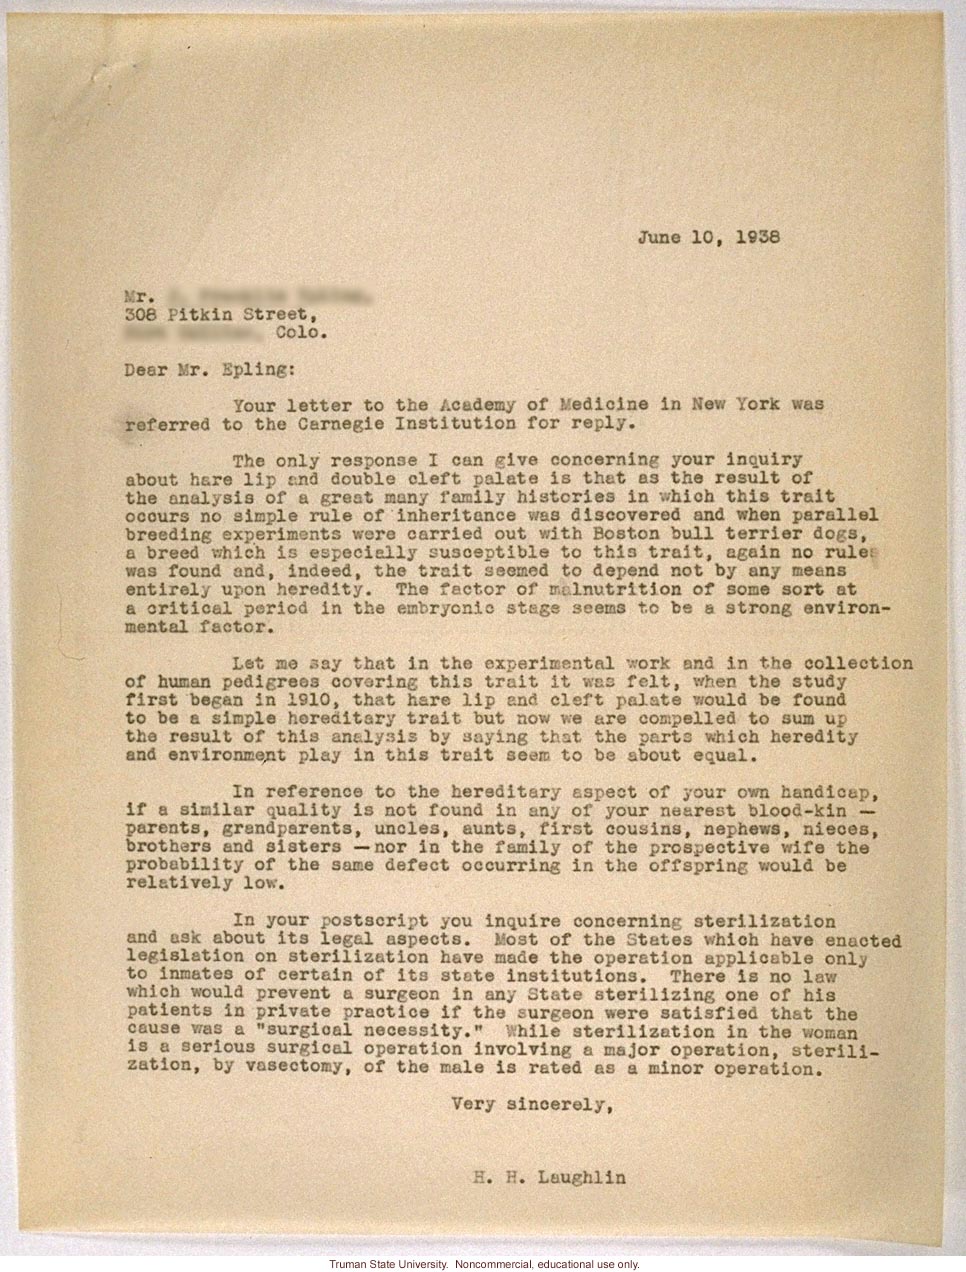 H. Laughlin letter in response to question about heredity of cleft lip and palate